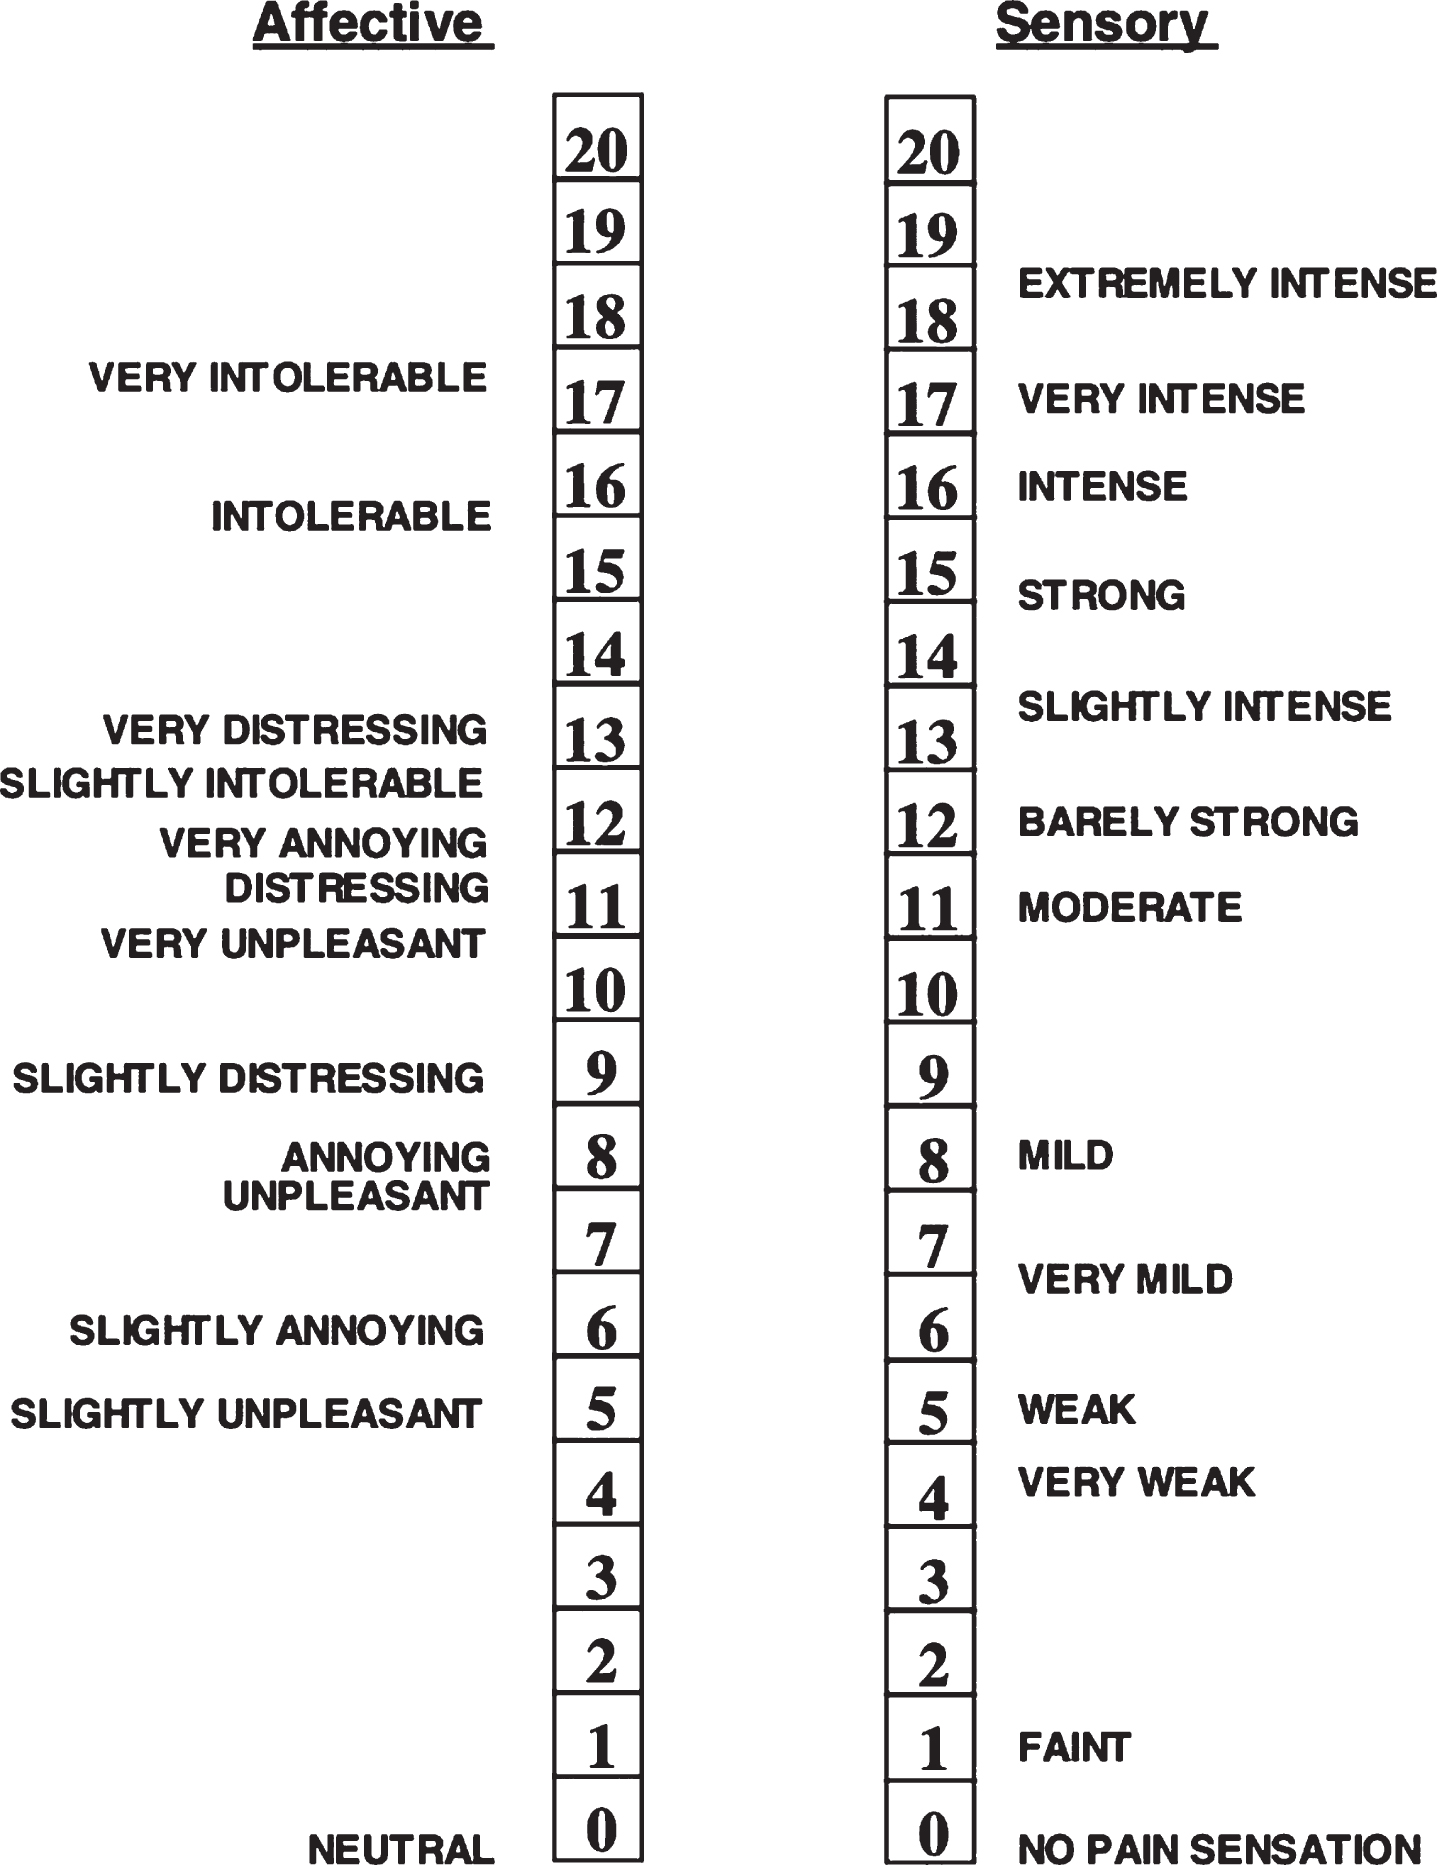 Affective Sensory and Unpleasantness Numerical Scale. Numerical descriptor scale used to measure affective unpleasantness and sensory intensity. Reprinted with permission from Eur J Pain, 9, Petzke F, Harris RE, Williams DA, Clauw DJ, Gracely RH, Differences in unpleasantness induced by experimental pressure pain between patients with fibromyalgia and healthy controls. 325–335. Copyright (2005), with permission from JohnWiley and Sons.